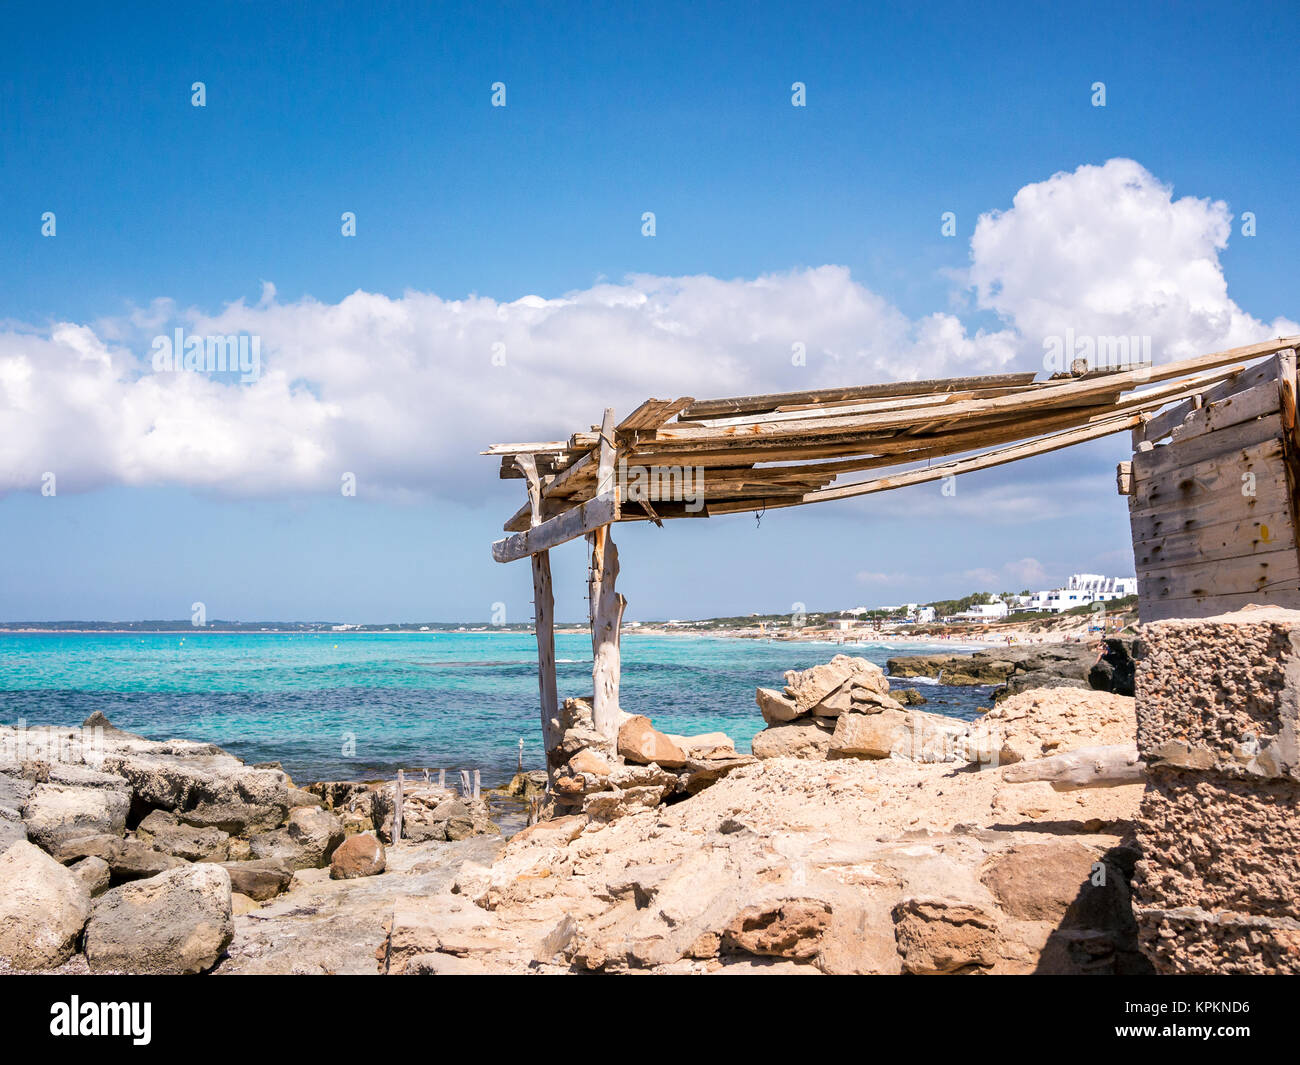 Typical constructions for fishermans in Formentera island, Spain Stock Photo